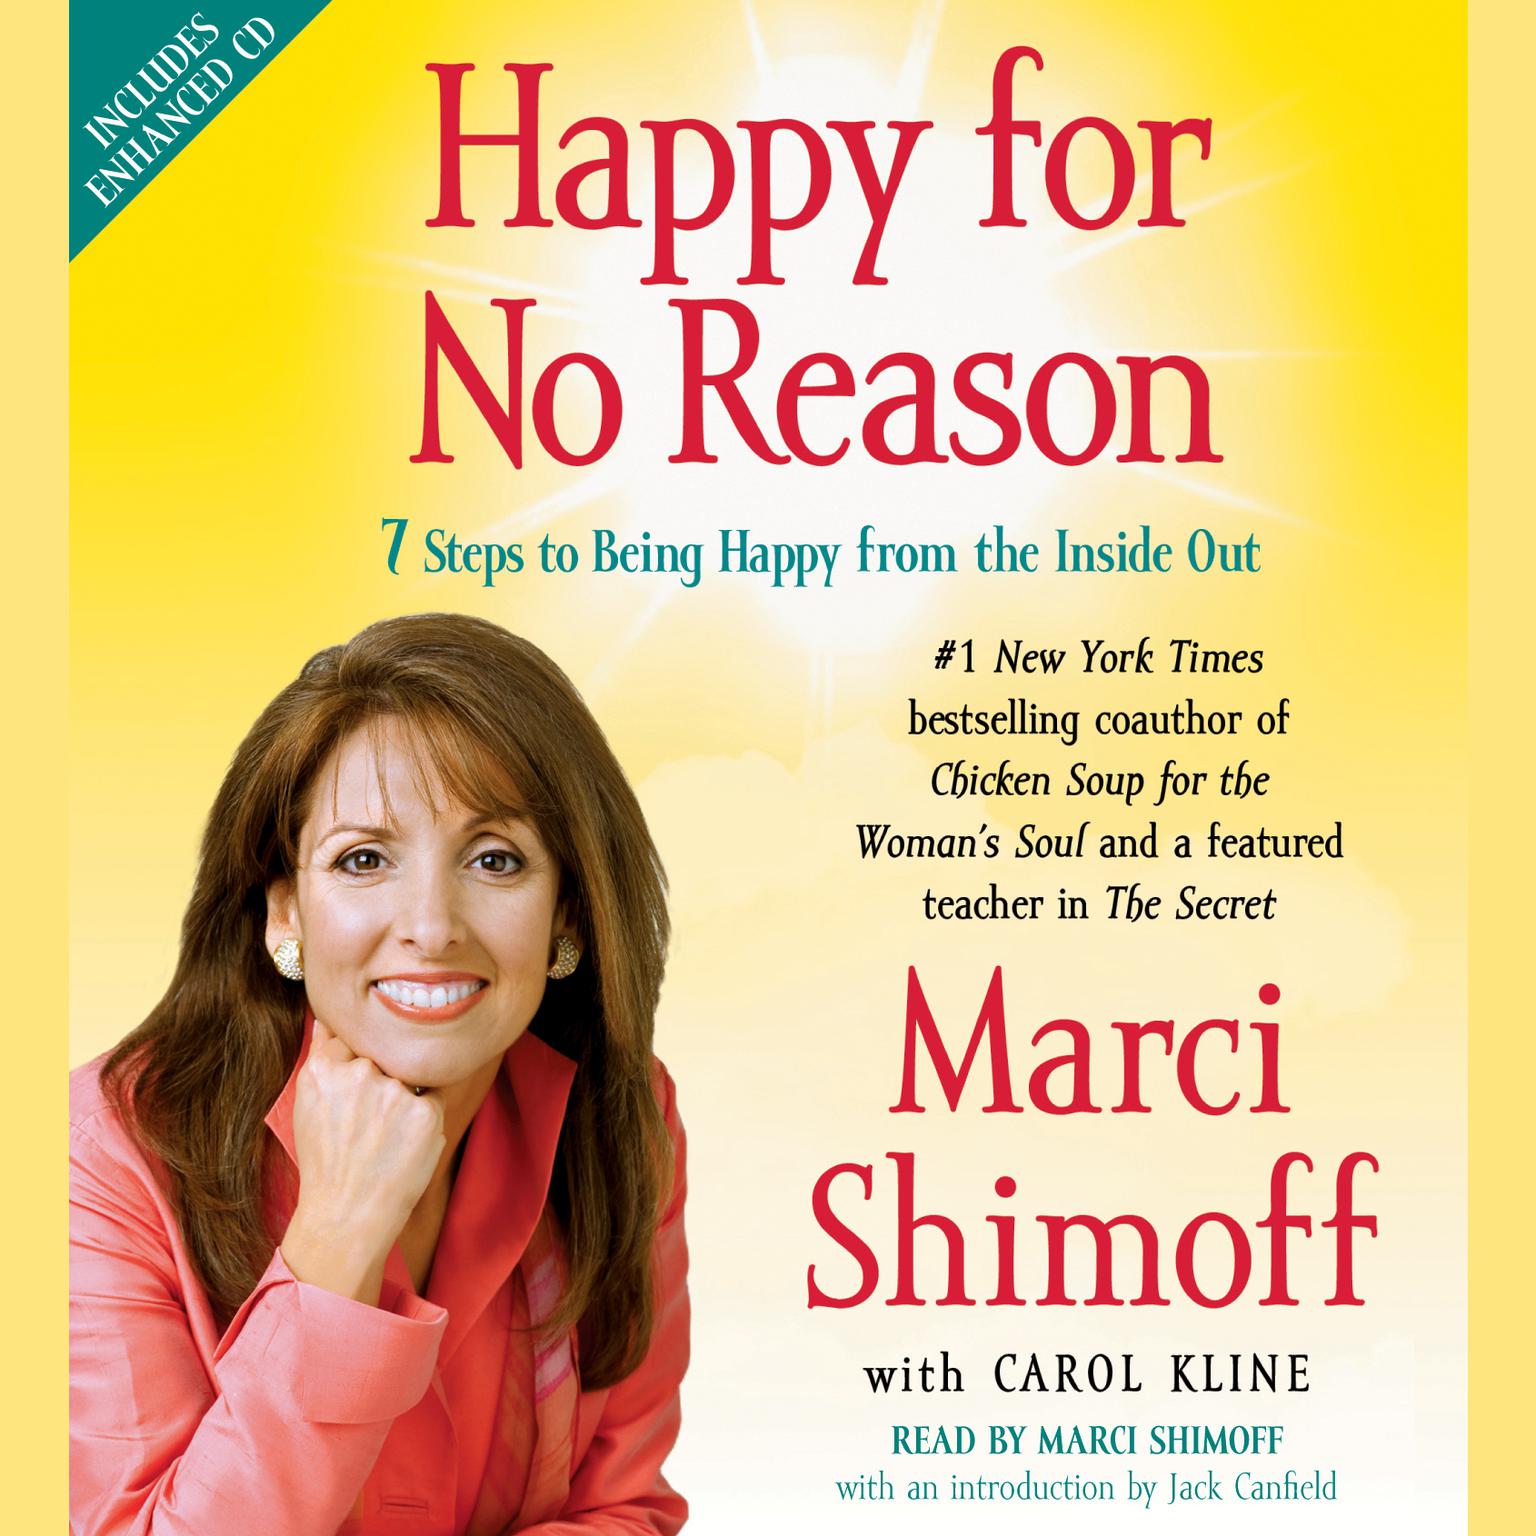 Happy for No Reason (Abridged): 7 Steps to Being Happy from the Inside Out Audiobook, by Marci Shimoff